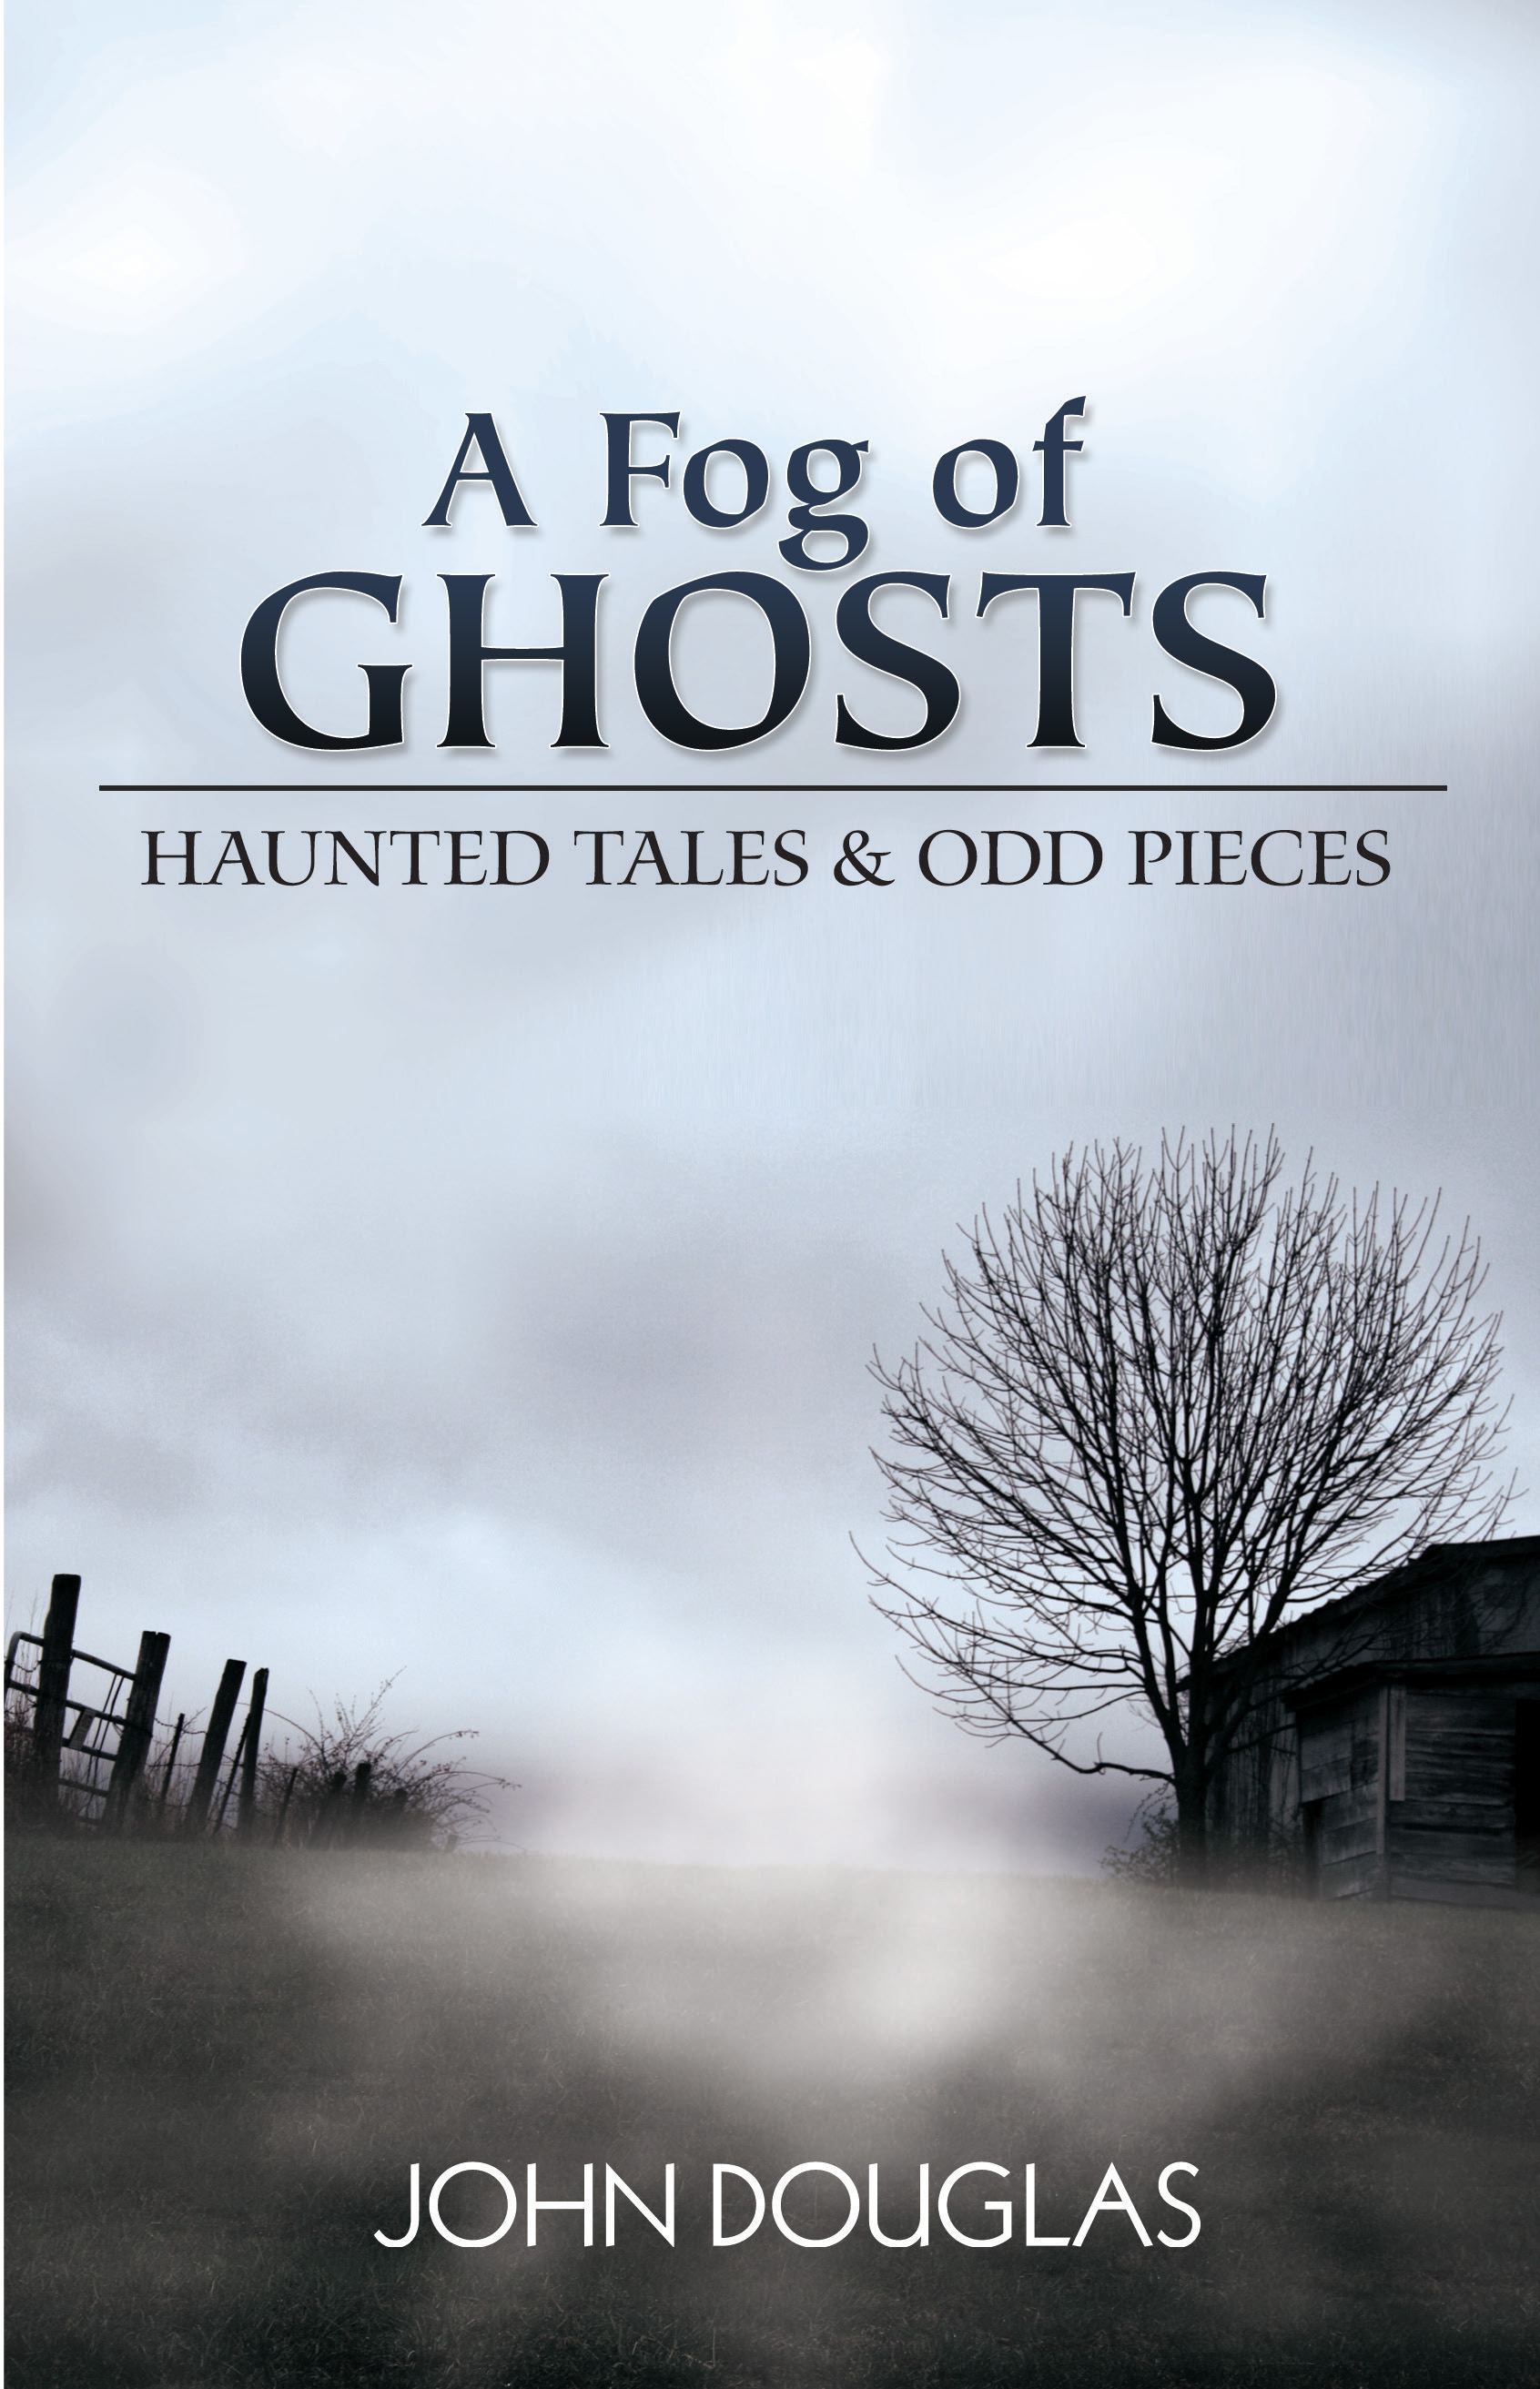 A Fog of Ghosts by John E